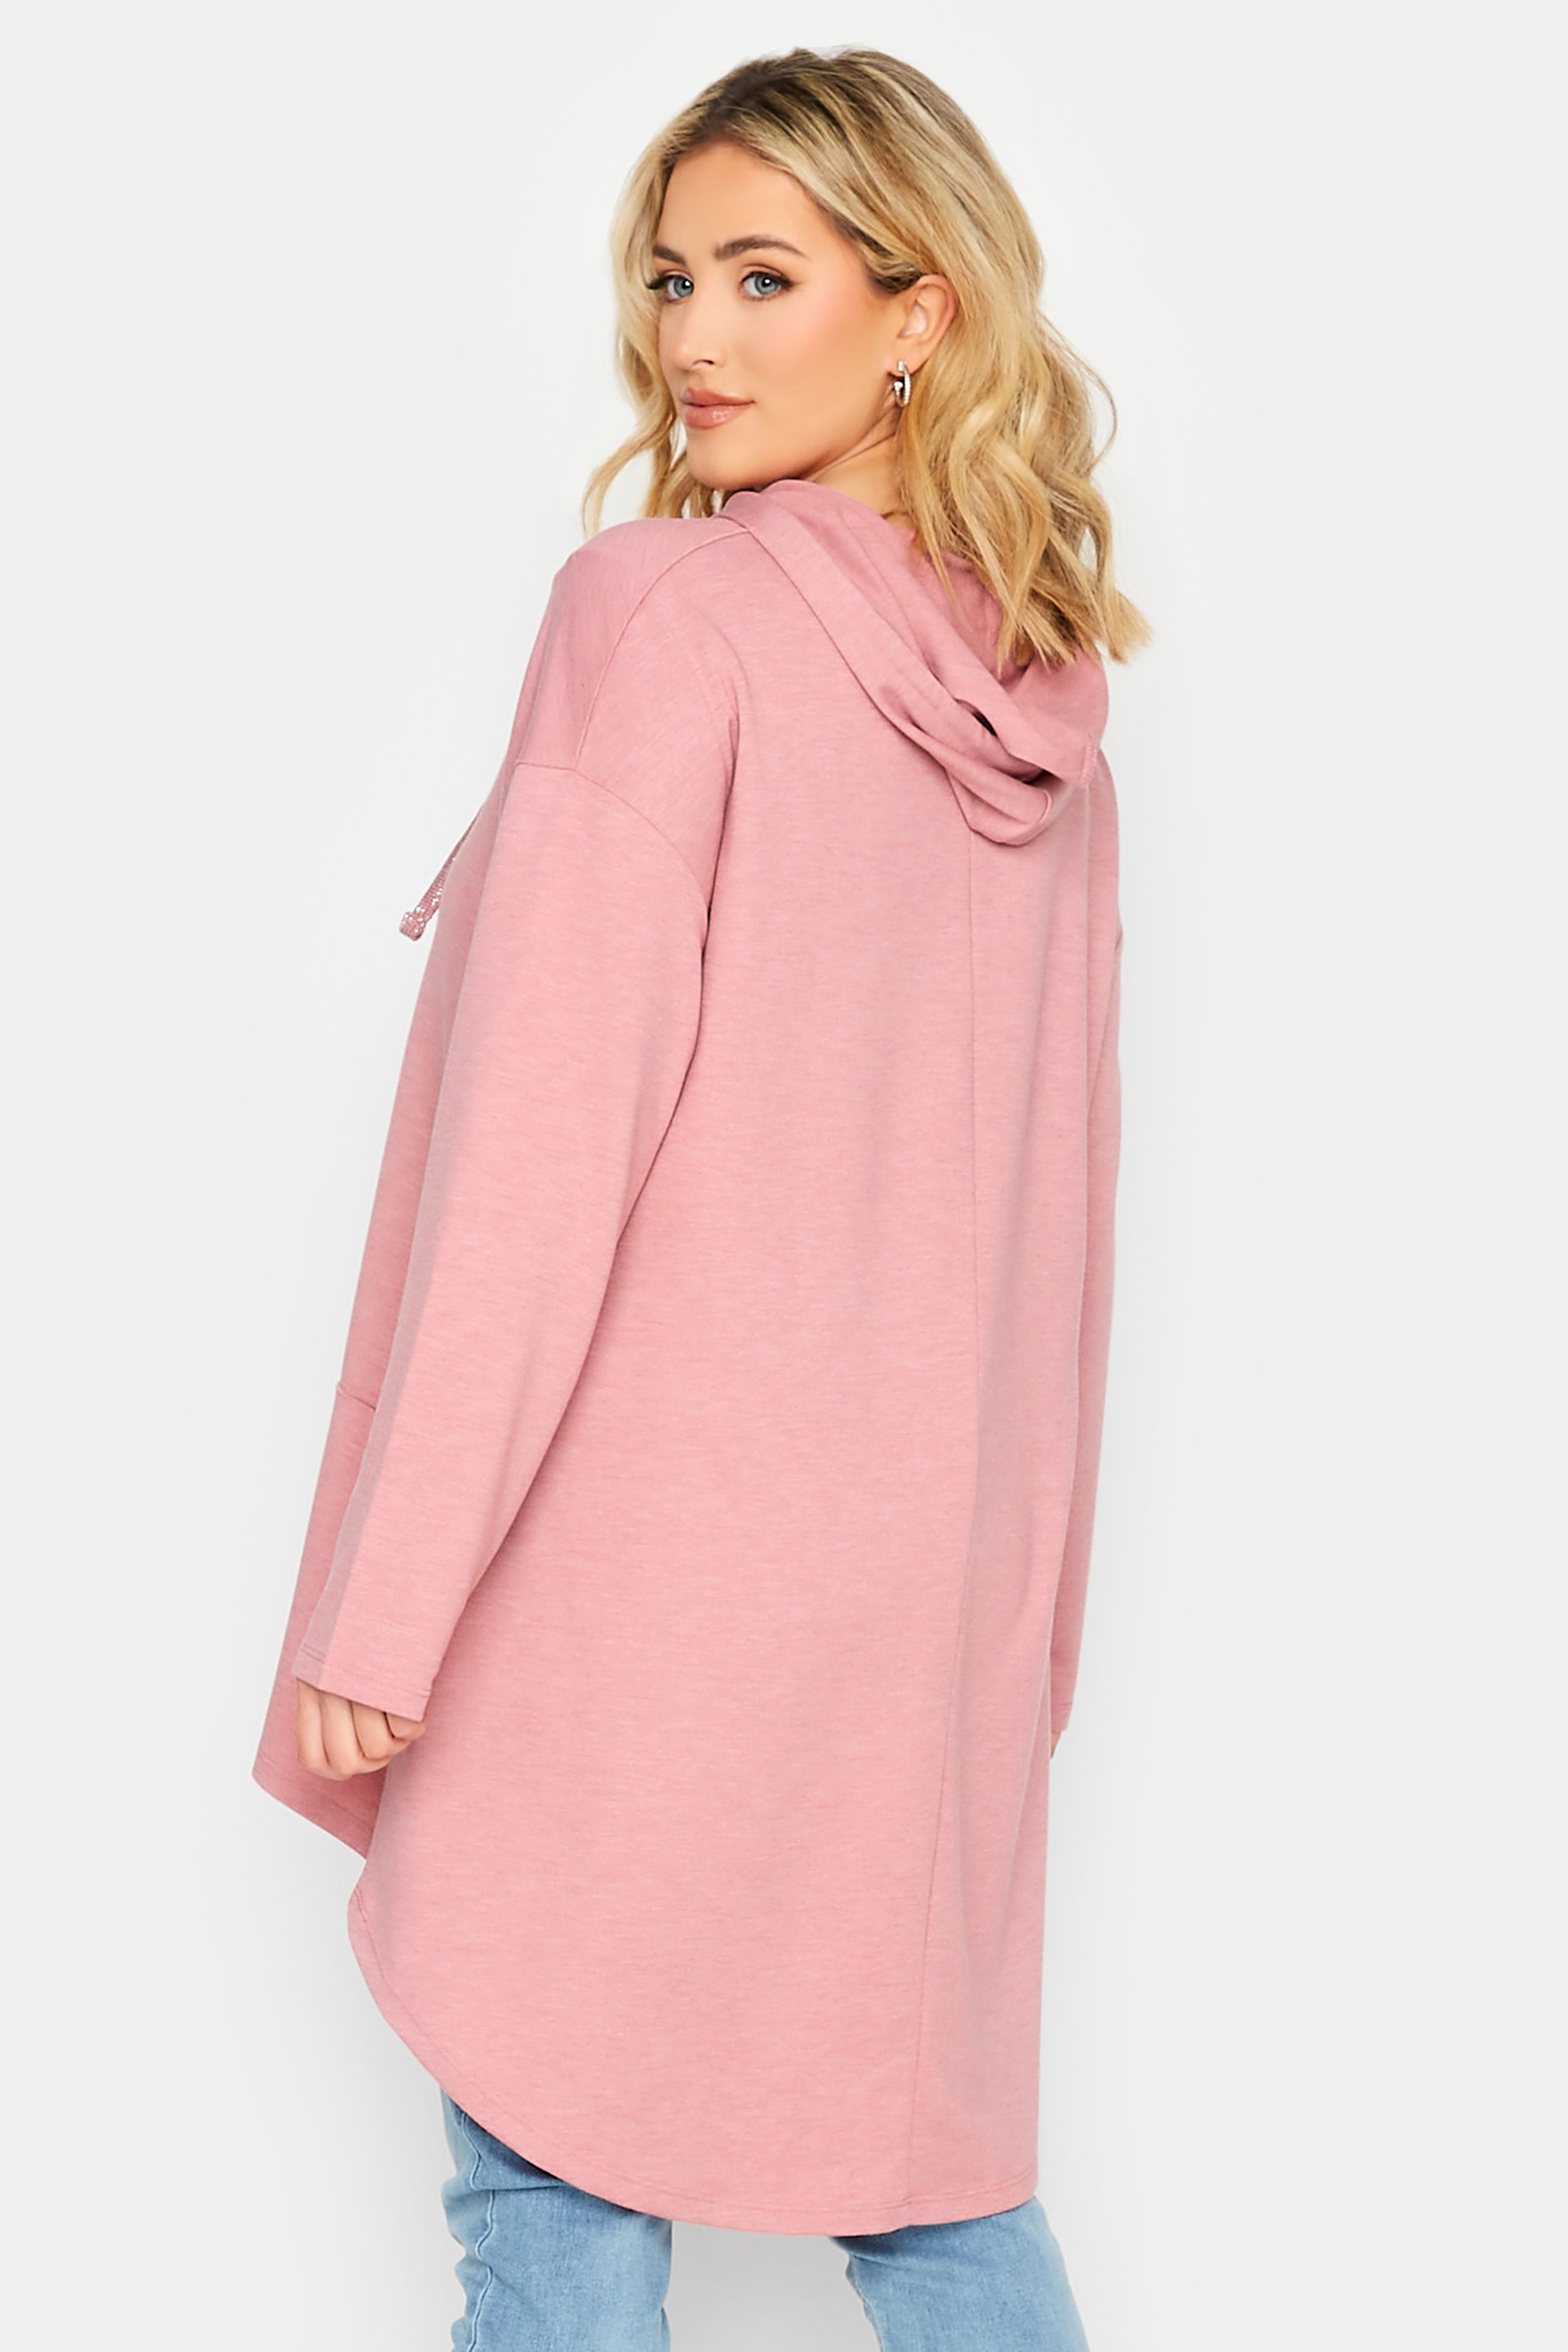 YOURS Plus Size Pink Metallic Cord Dipped Hem Hoodie | Yours Clothing 3